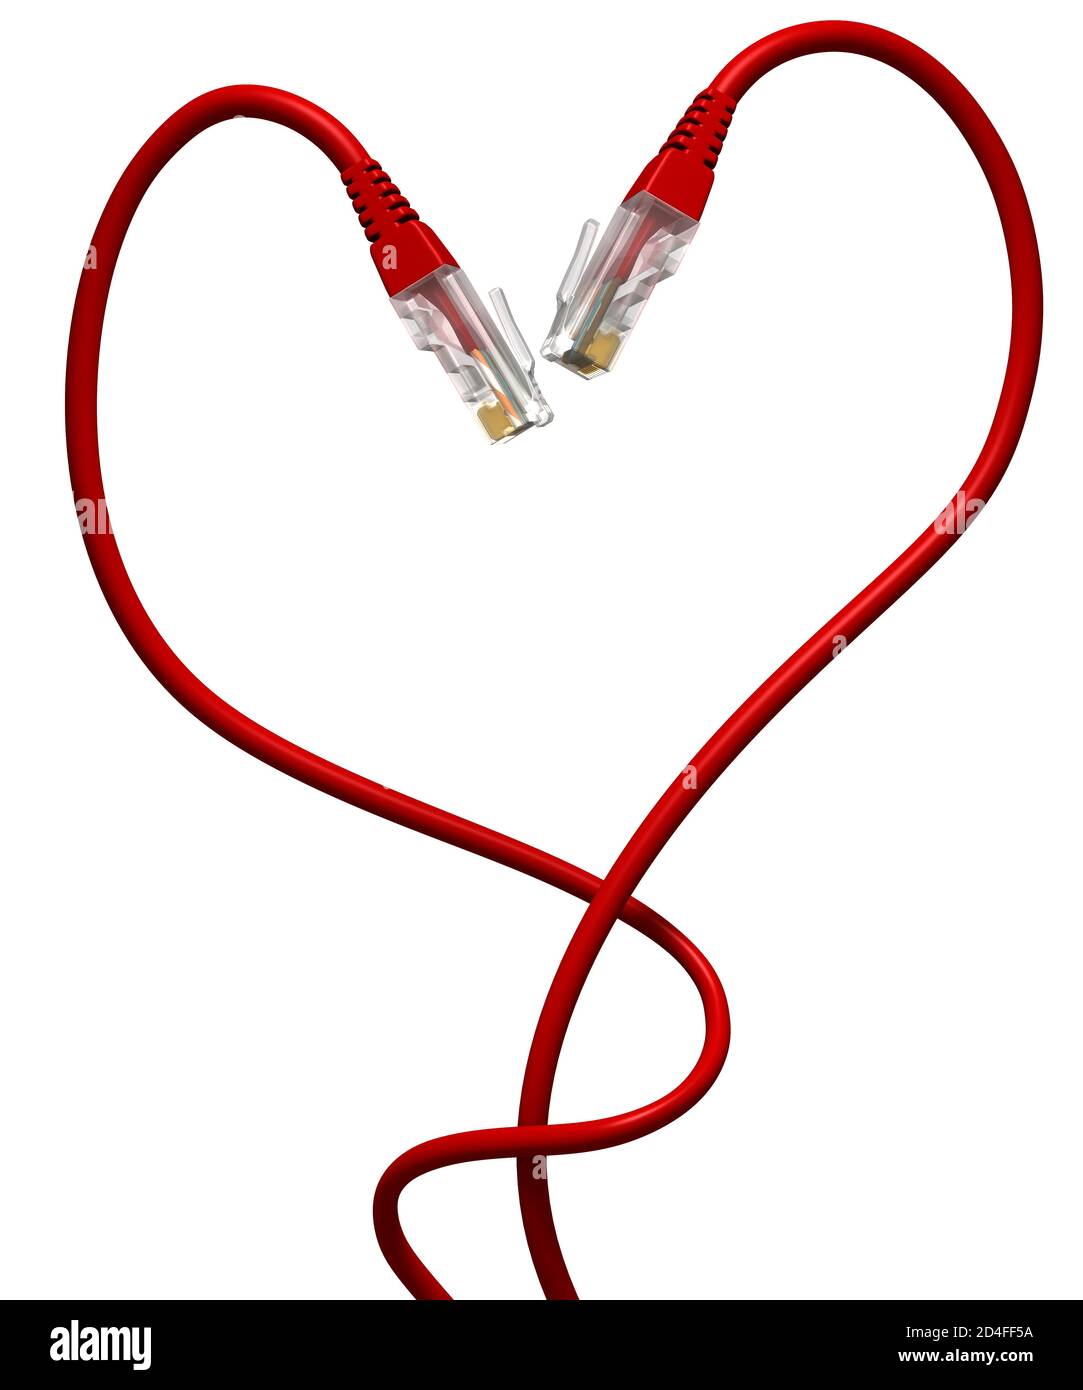 two ethernet cables intertwined in the shape of a heart. Love, connection, in touch Stock Photo